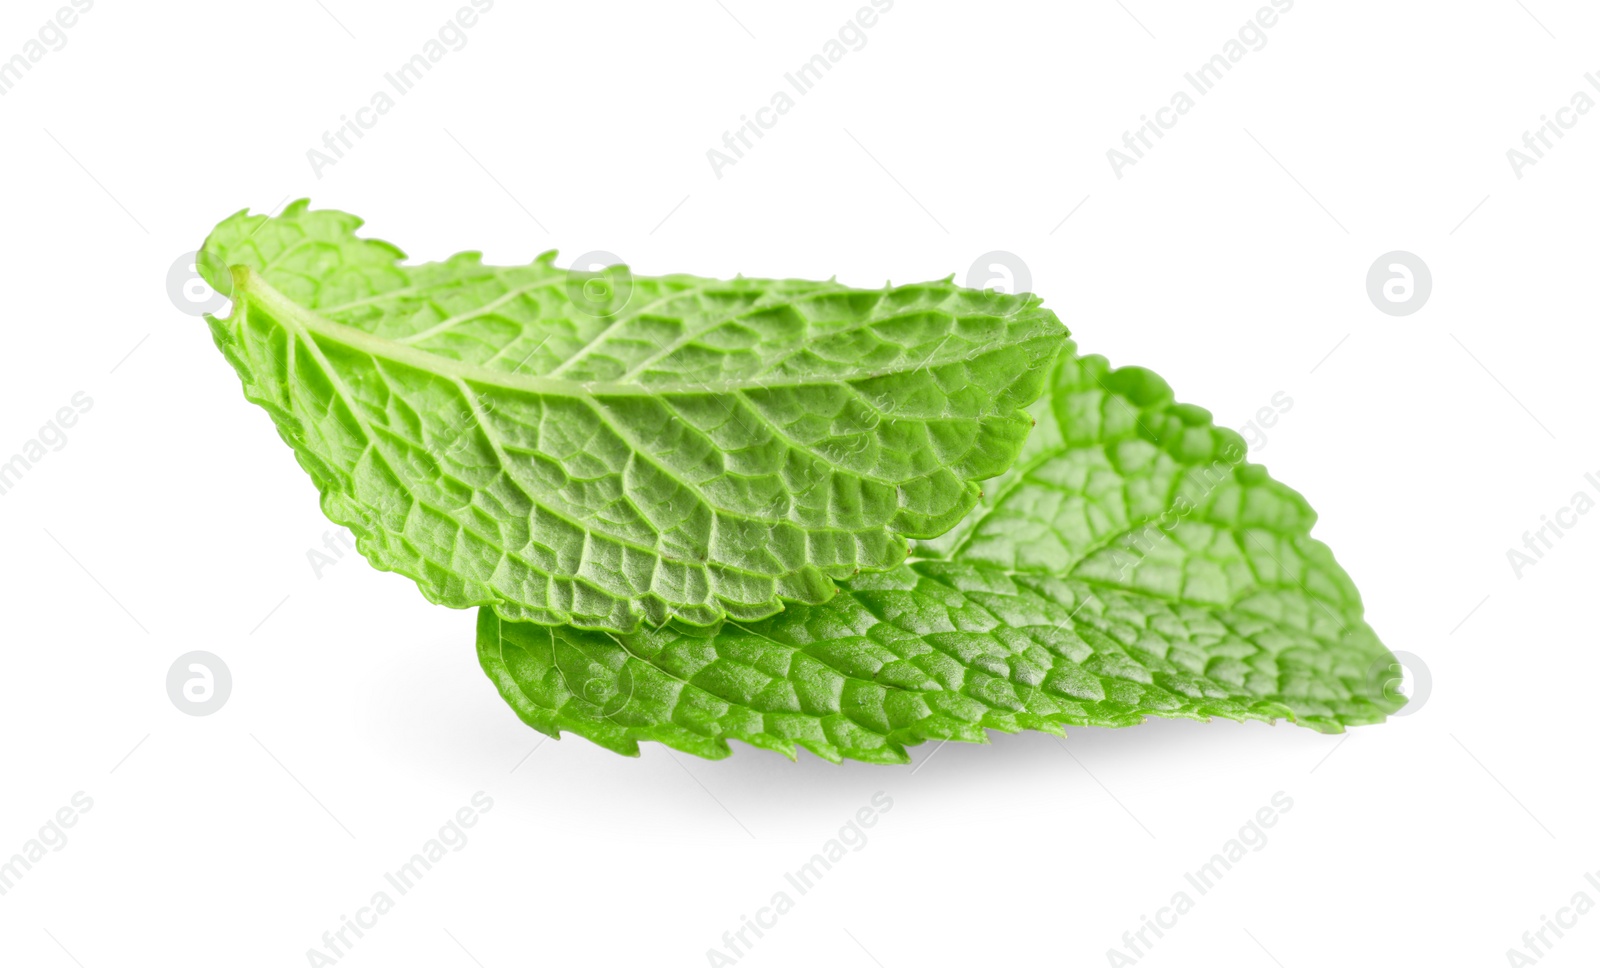 Photo of Fresh mint plant with green leaves isolated on white